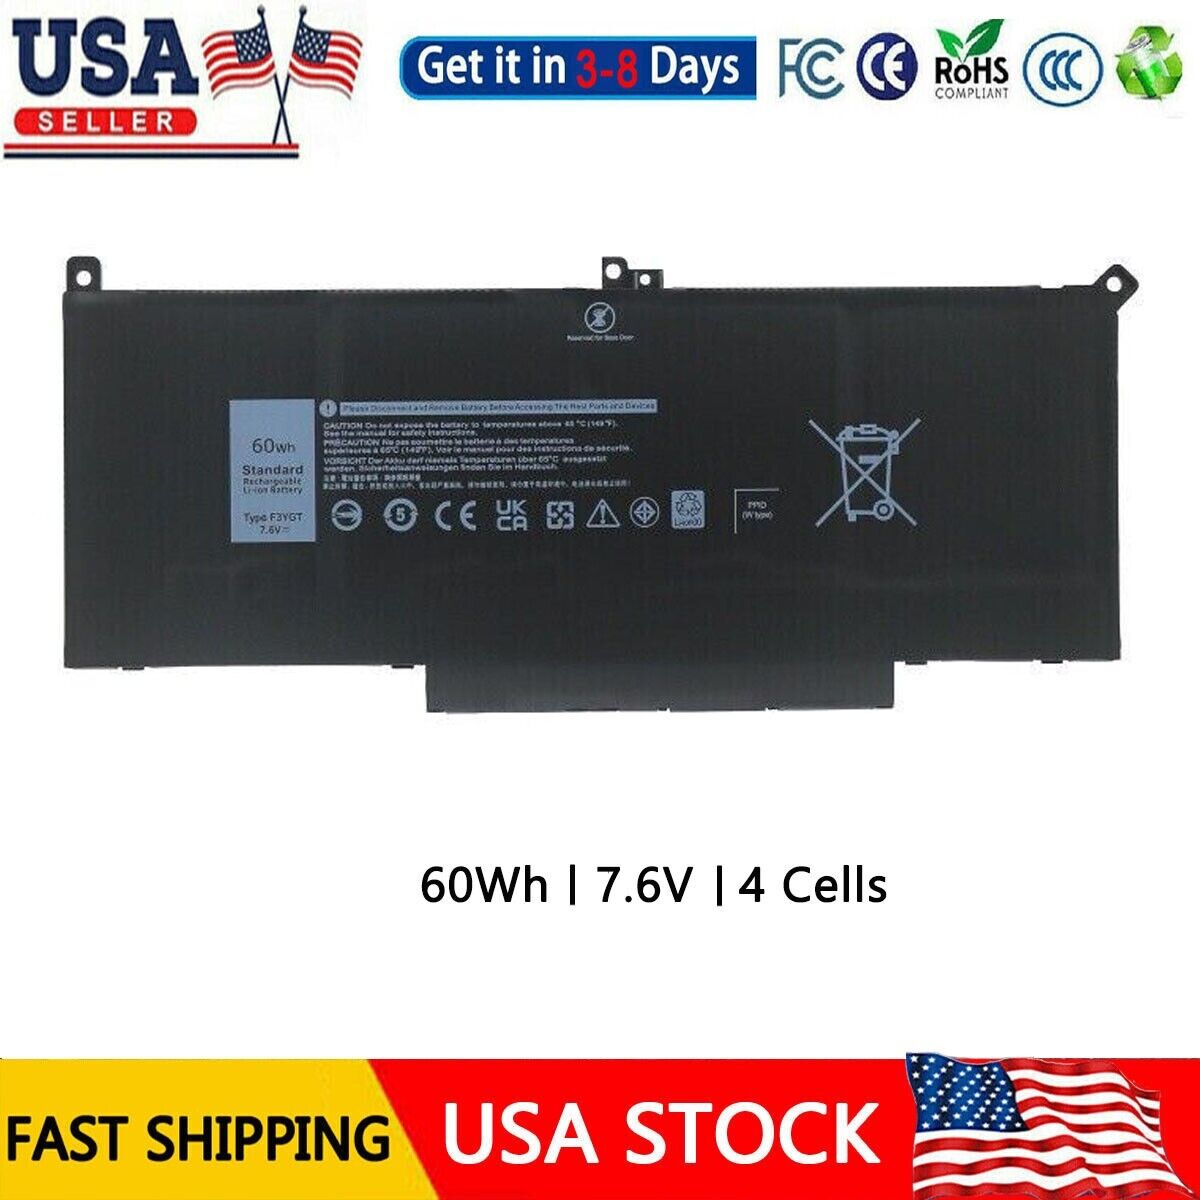 F3YGT Battery For Dell Latitude 12 7000 7280 7290 13 7380 7390 14 7480 7490 60Wh